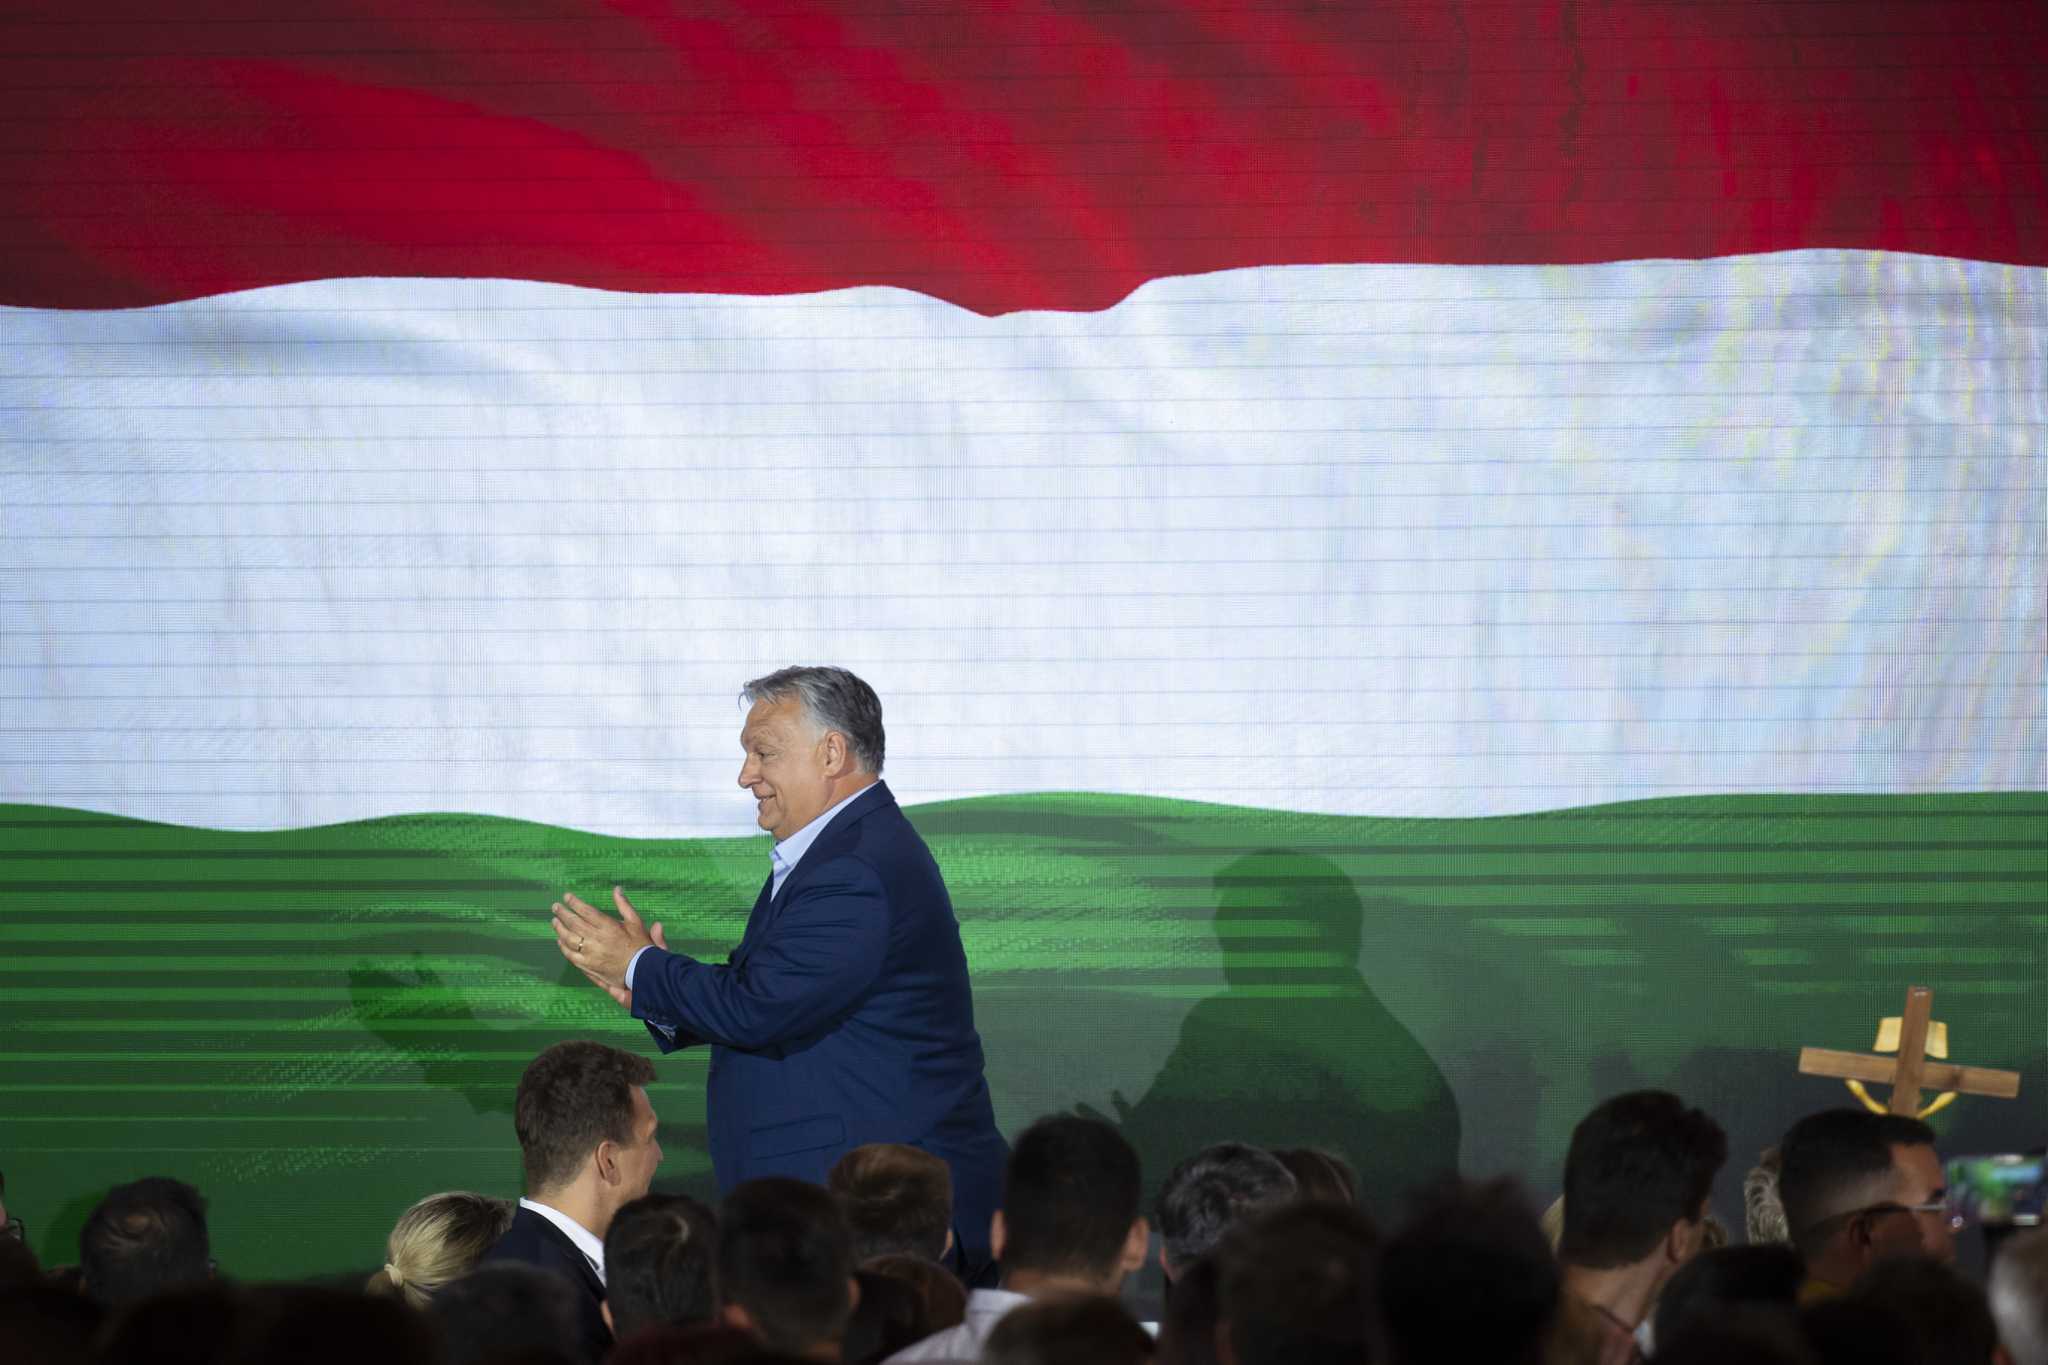 Hungary's Orbán shows weakest performance in EU elections in 20 years